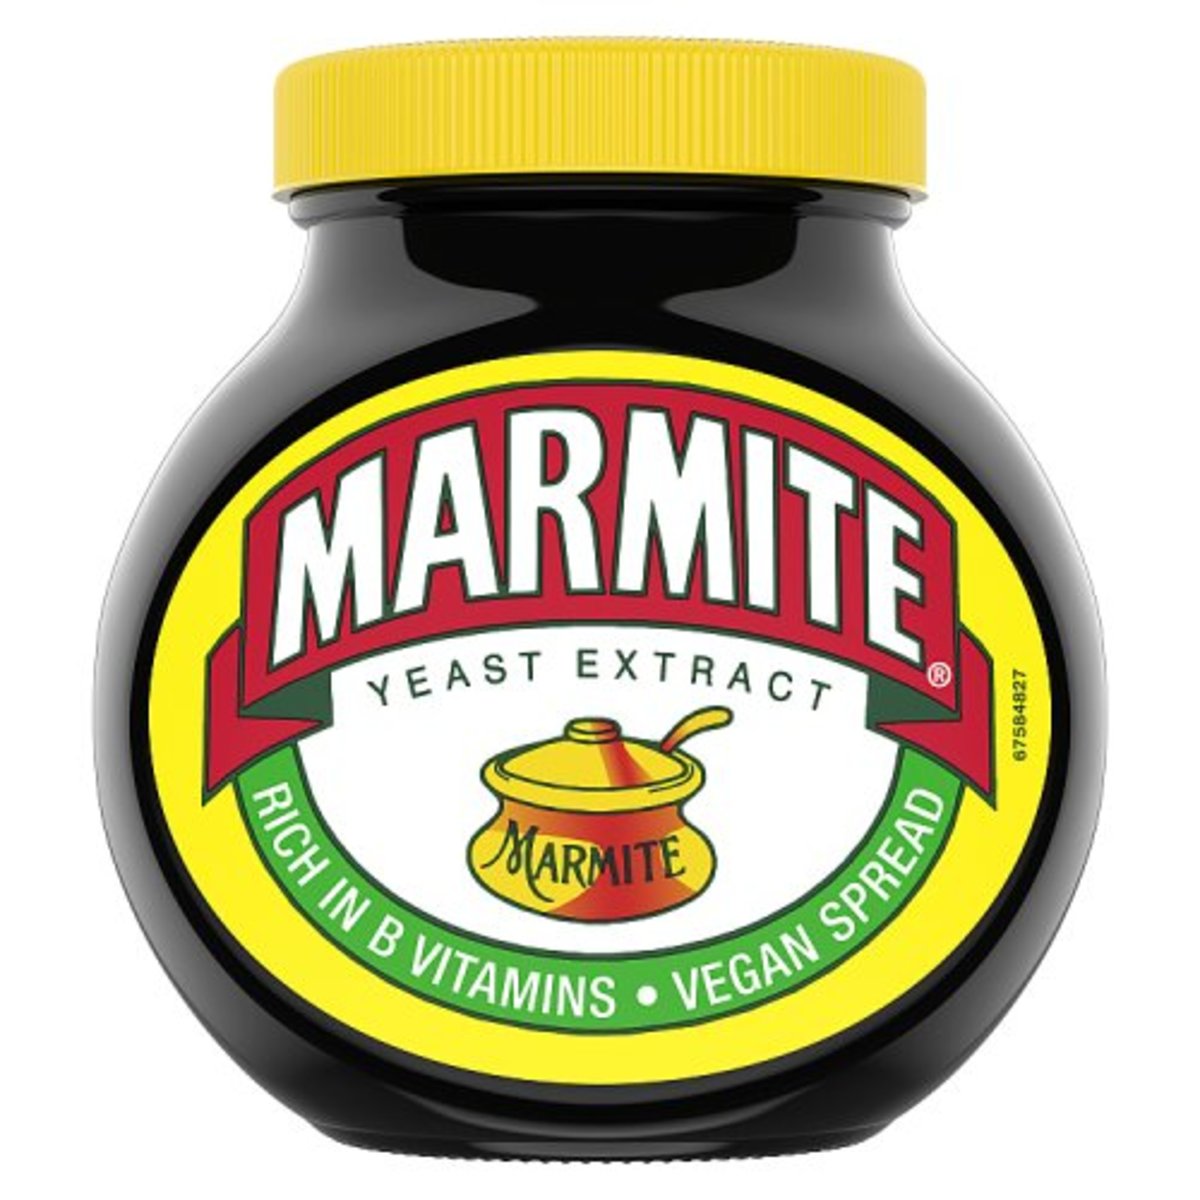 Marmite, Do You Love It or Hate It?